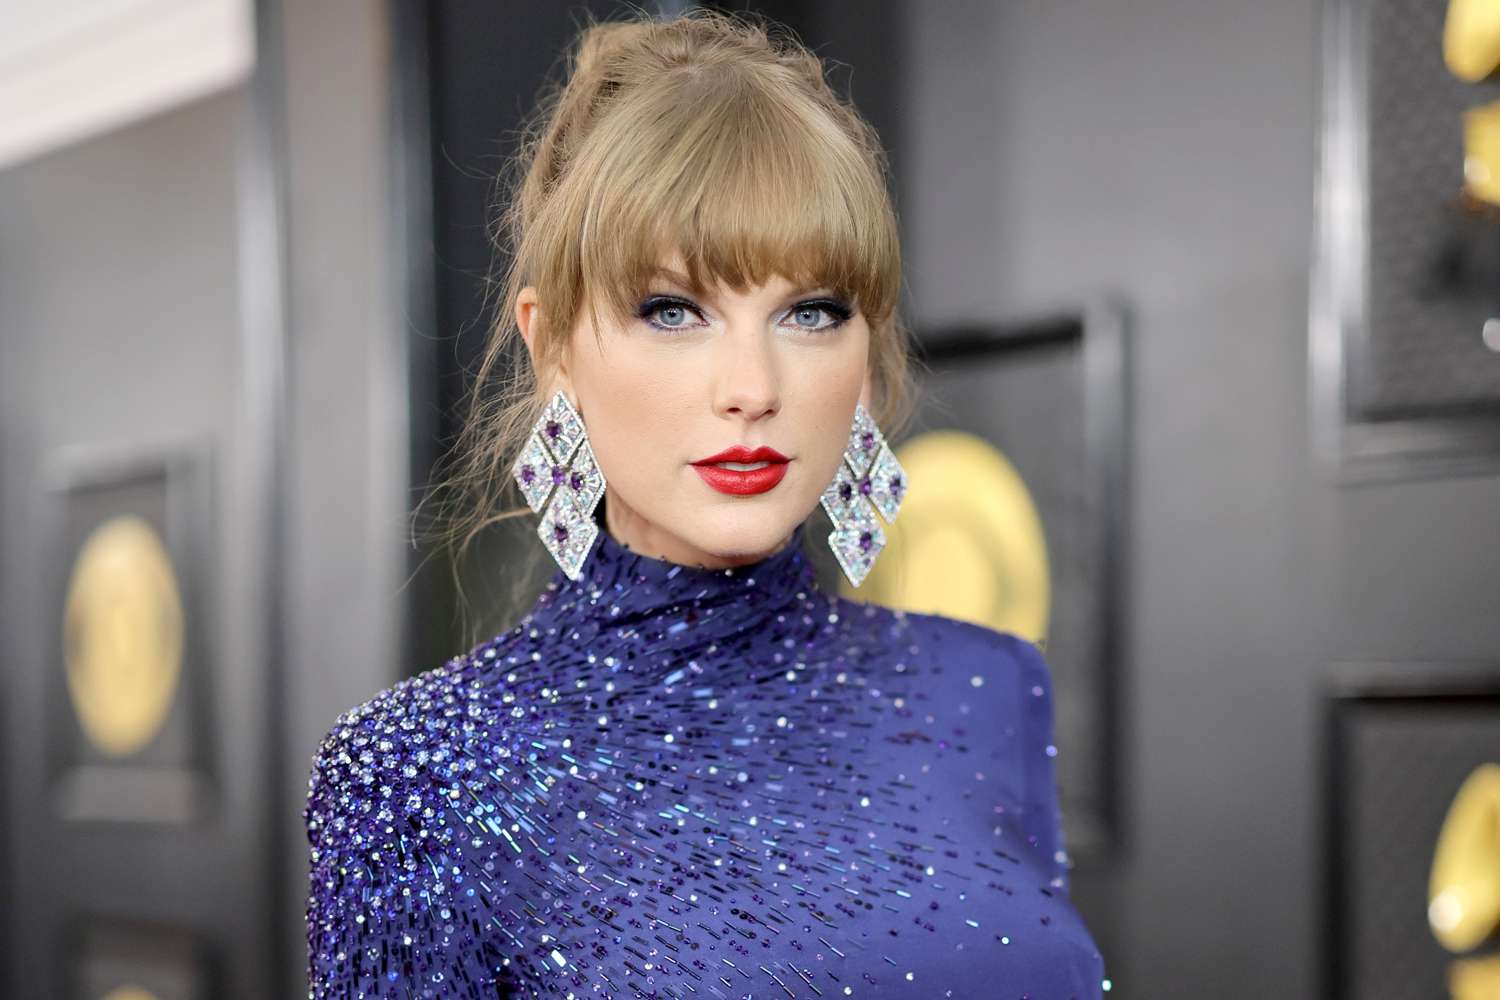 Taylor Swift Concert Controversy: Shazam Debacle Divides Fans